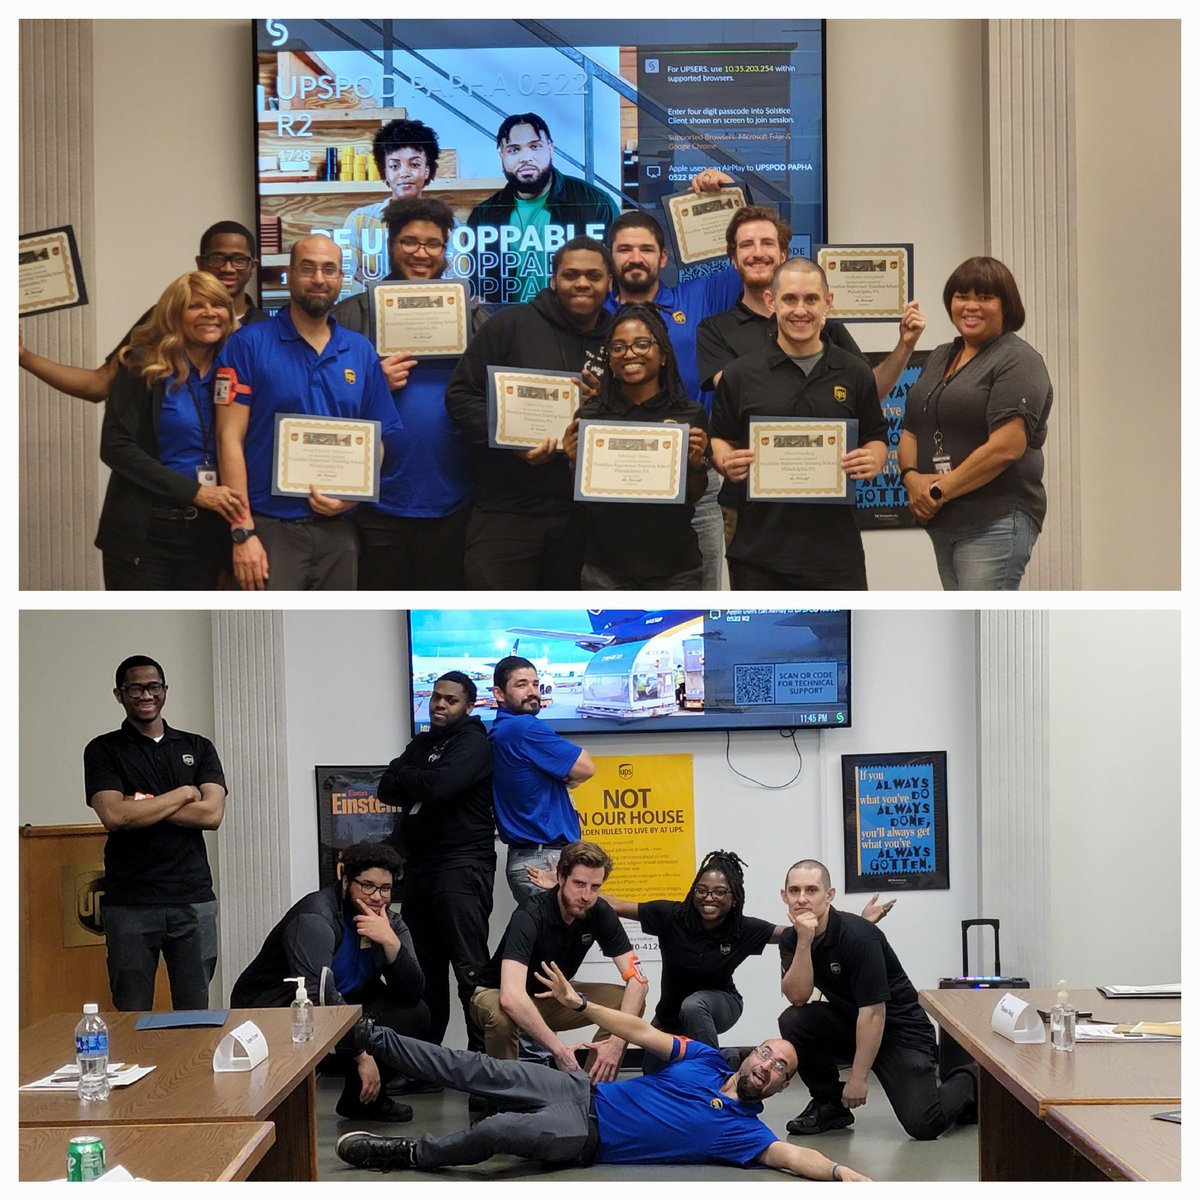 #TeamPHLSnaps @RayBarczak @daveortone @LaurenCarroll44 @RaymondChew95 @JamesSm03402046 @BobKee6 @BickerstaffMar Congratulations to FSTS Class #4! These sups came and conquered the expectations and now they are ready to implement their knowledge. Safety and Methods Driven!